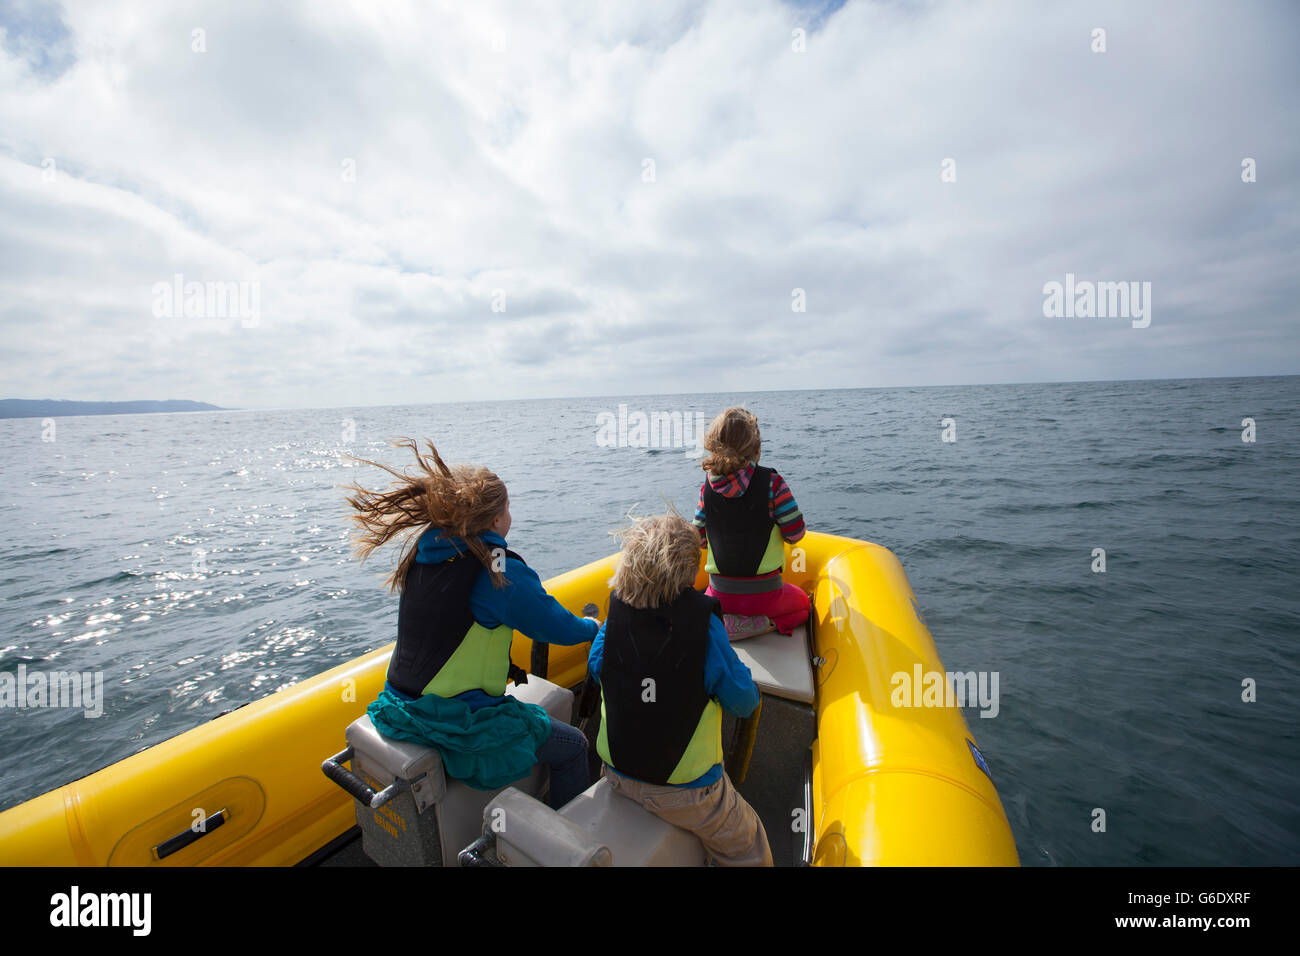 Three children ages 5, 8, and 9 loving the thrill of the ride with Captain Russell Moore of Xplore Offshore, San Diego's original ocean-rafting outfitter.  California. Stock Photo